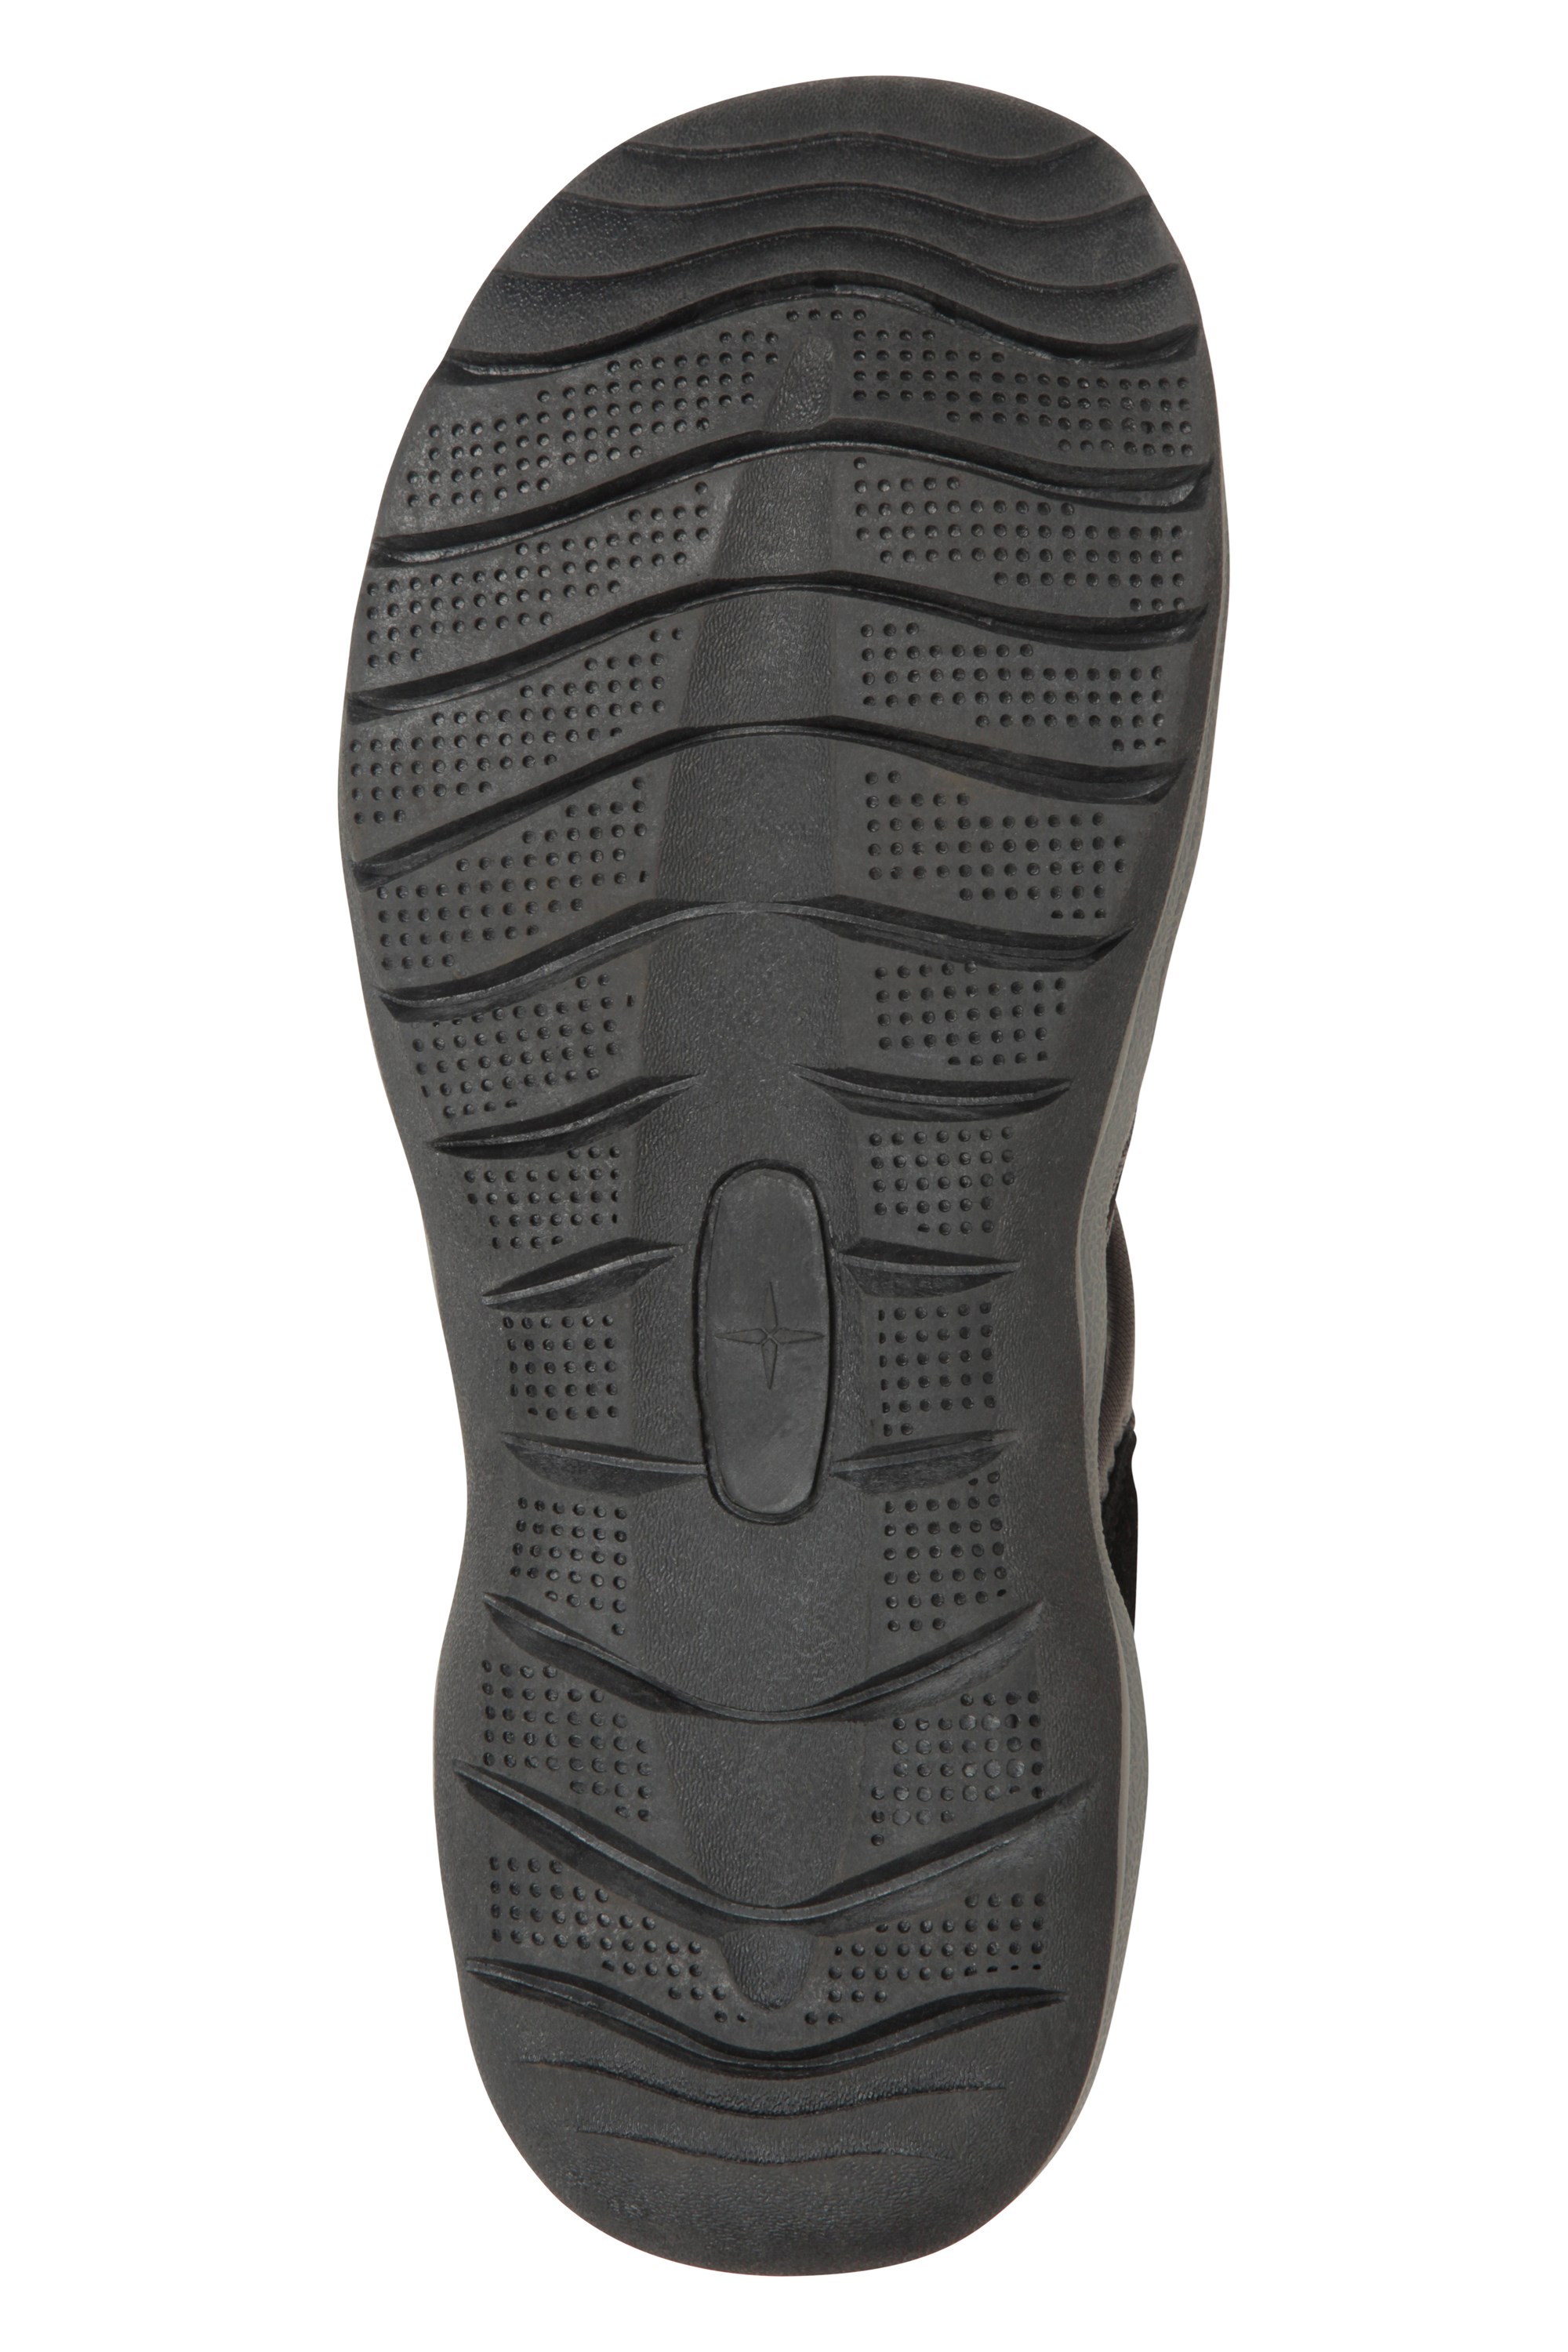 Bay Reef Mens Mountain Warehouse Shandals